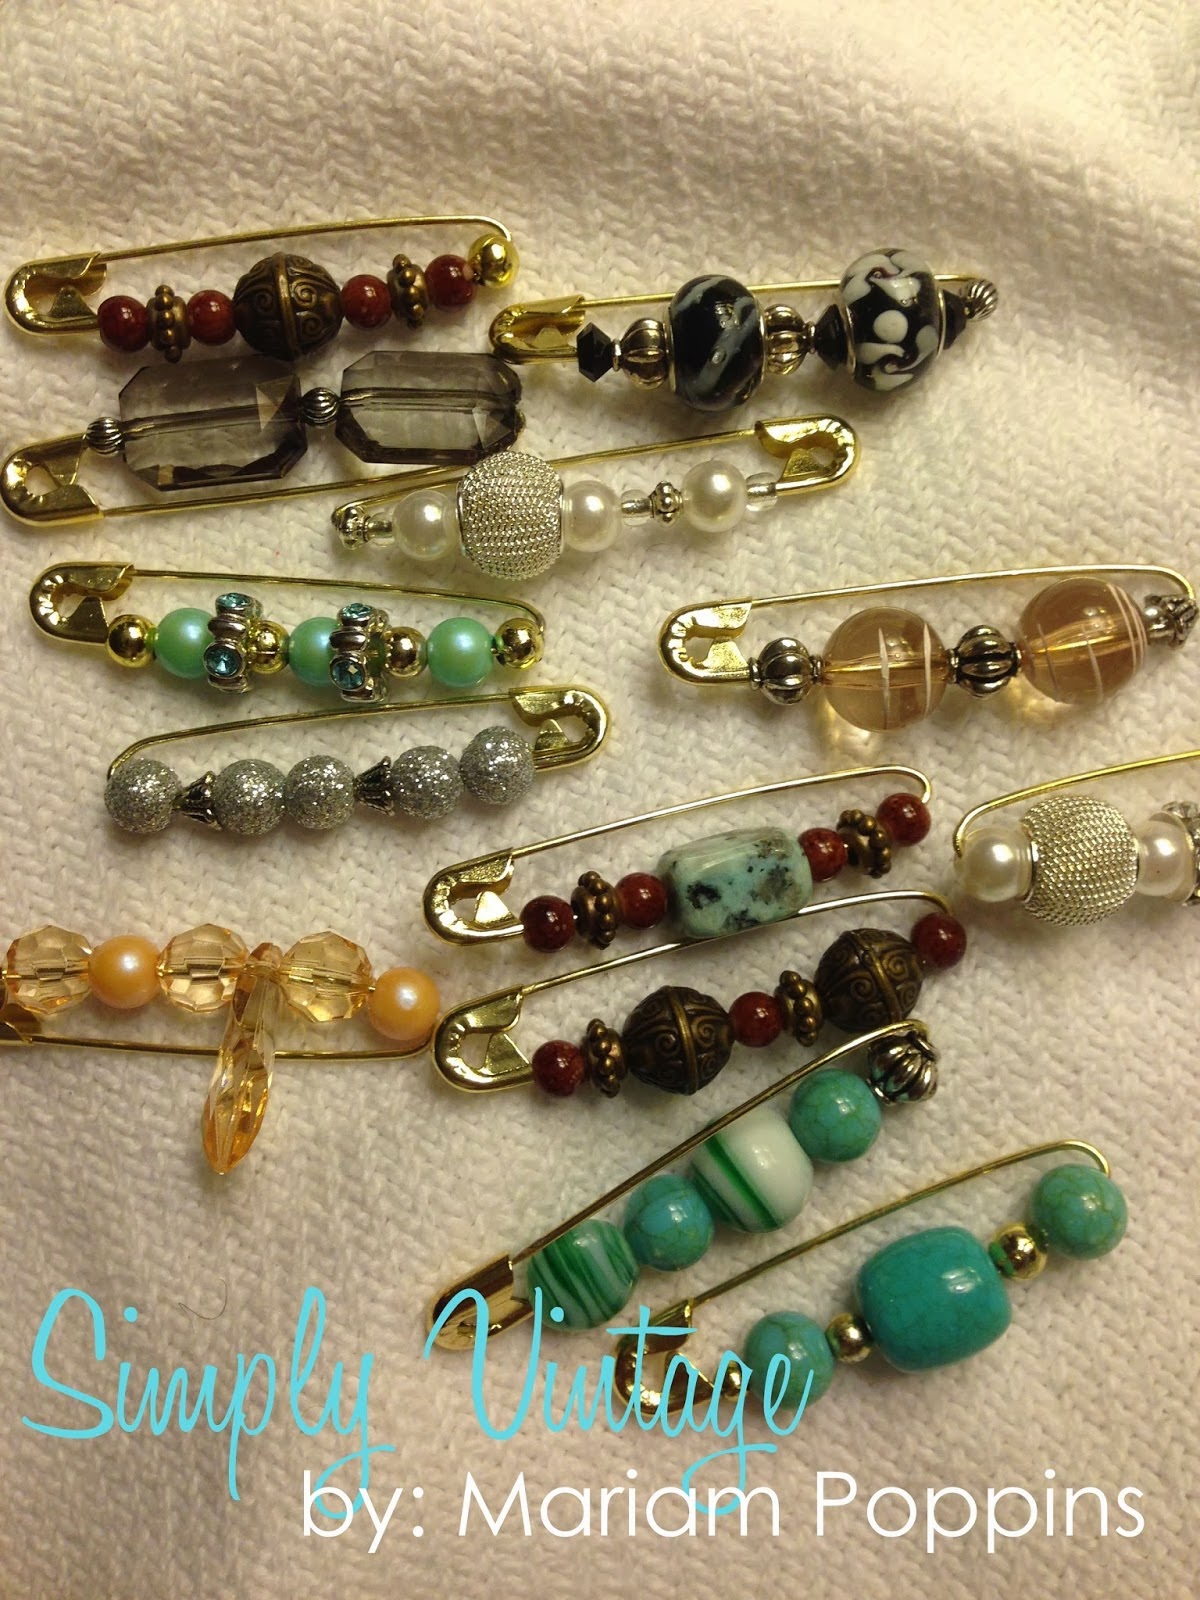 How to Make Braucherei Charms and Amulets from Safety Pins